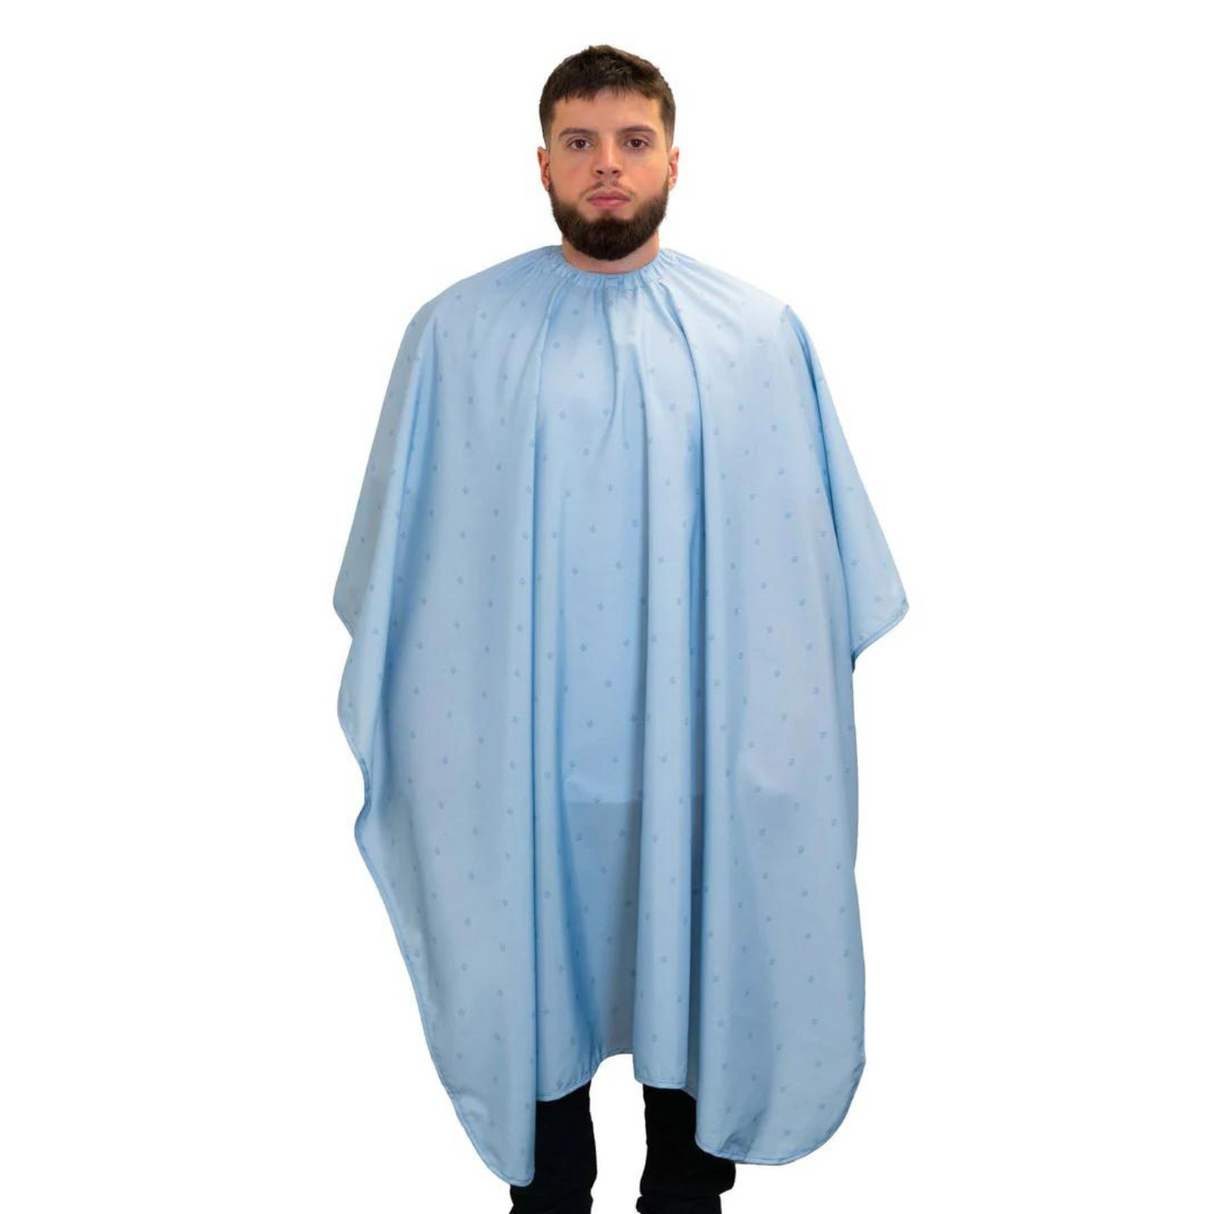 Barber Strong The Barber Shield Cape - Arctic Blue